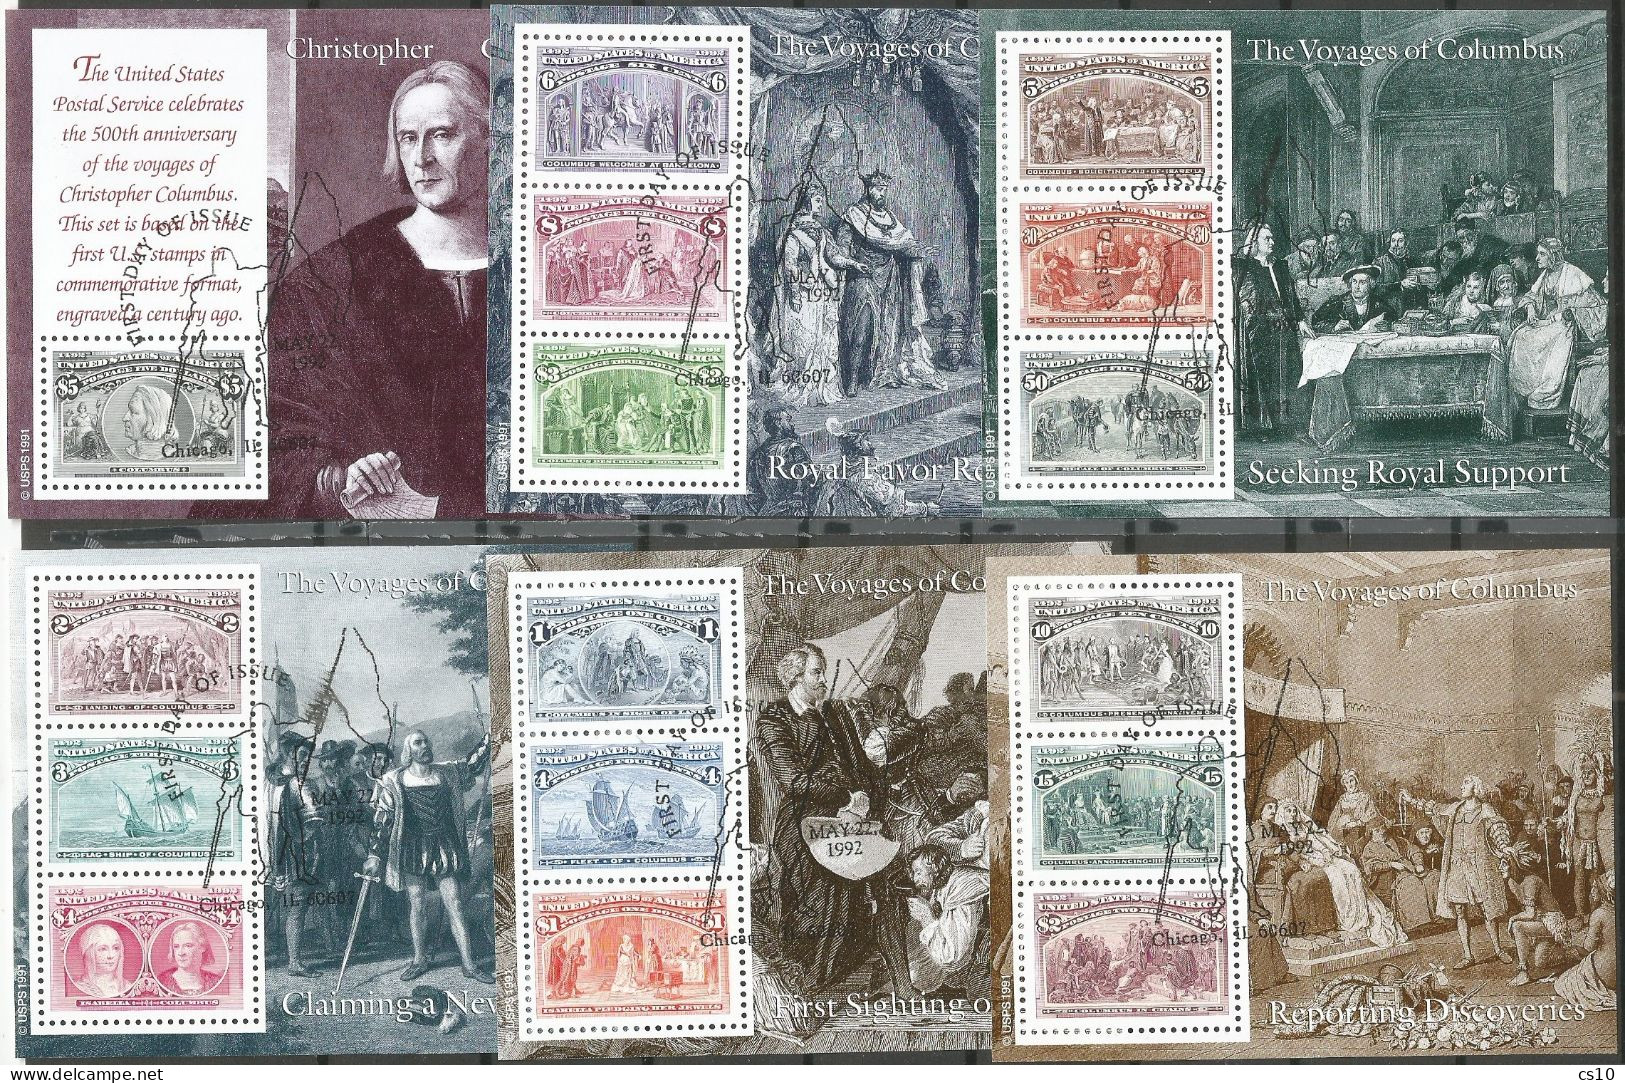 USA 1992 Columbian Set Columbus Colombo SC.#2624/29 Cpl 6 Souvenir Sheet With FD Cancellation - Annate Complete